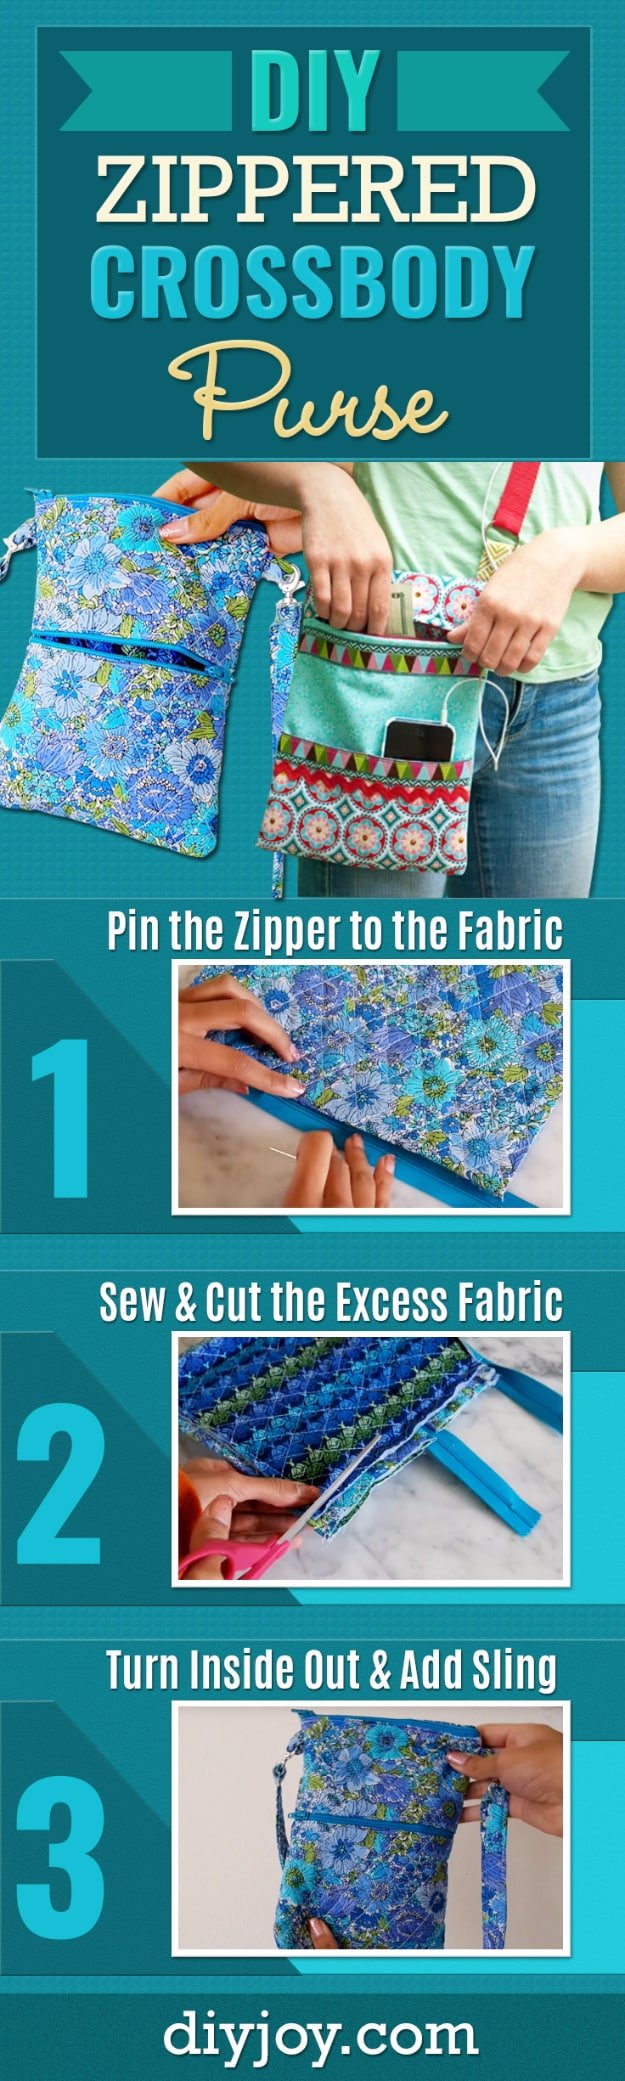 Creative DIY Projects With Zippers - Zippered Crossbody Bag - Easy Crafts and Fashion Ideas With A Zipper - Jewelry, Home Decor, School Supplies and DIY Gift Ideas - Quick DIYs for Fun Weekend Projects 